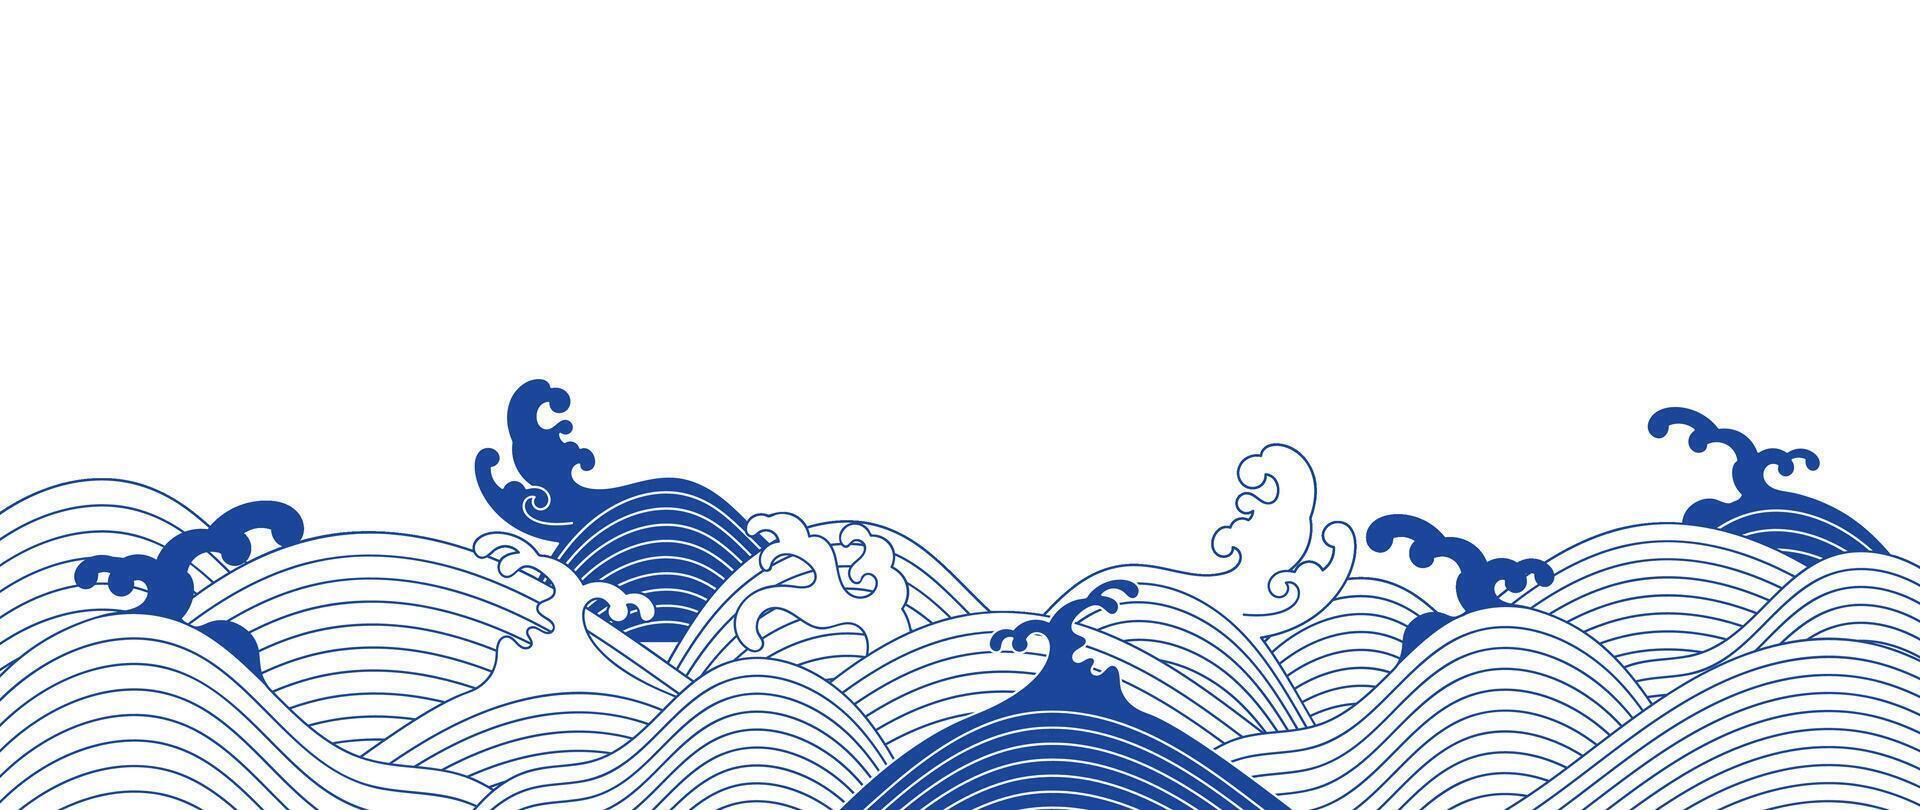 Japanese sea wave background vector. Wallpaper design with blue and white ocean wave pattern backdrop. Modern luxury oriental illustration for cover, banner, website, decor, border. vector